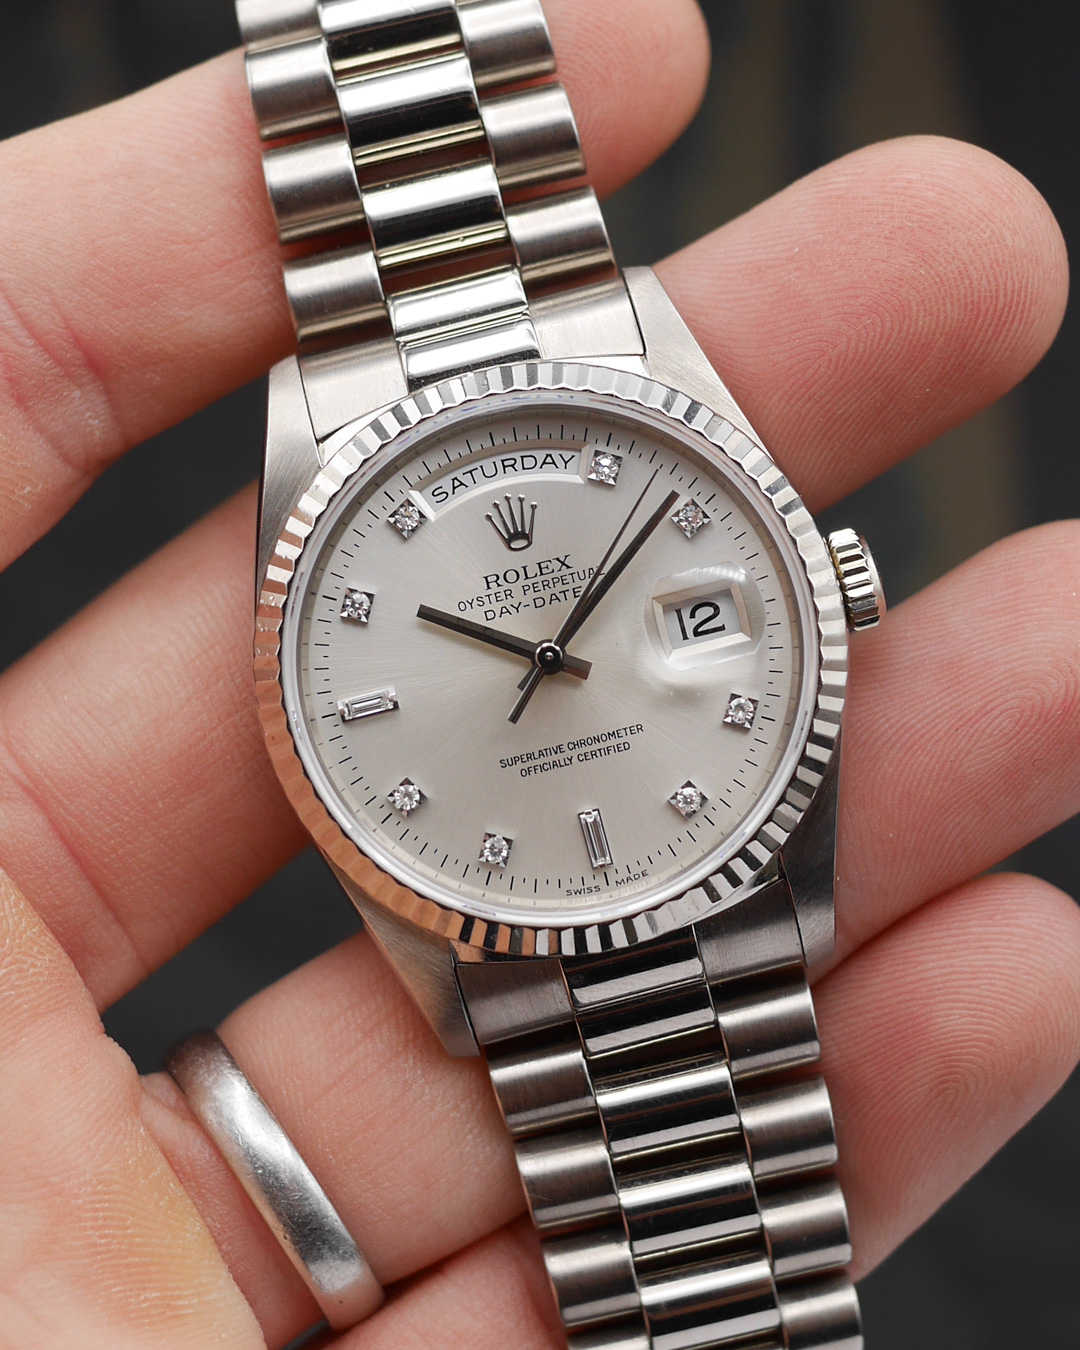 1996 Rolex Day-Date ref. 18239 in with diamond indexes Sabiwatches